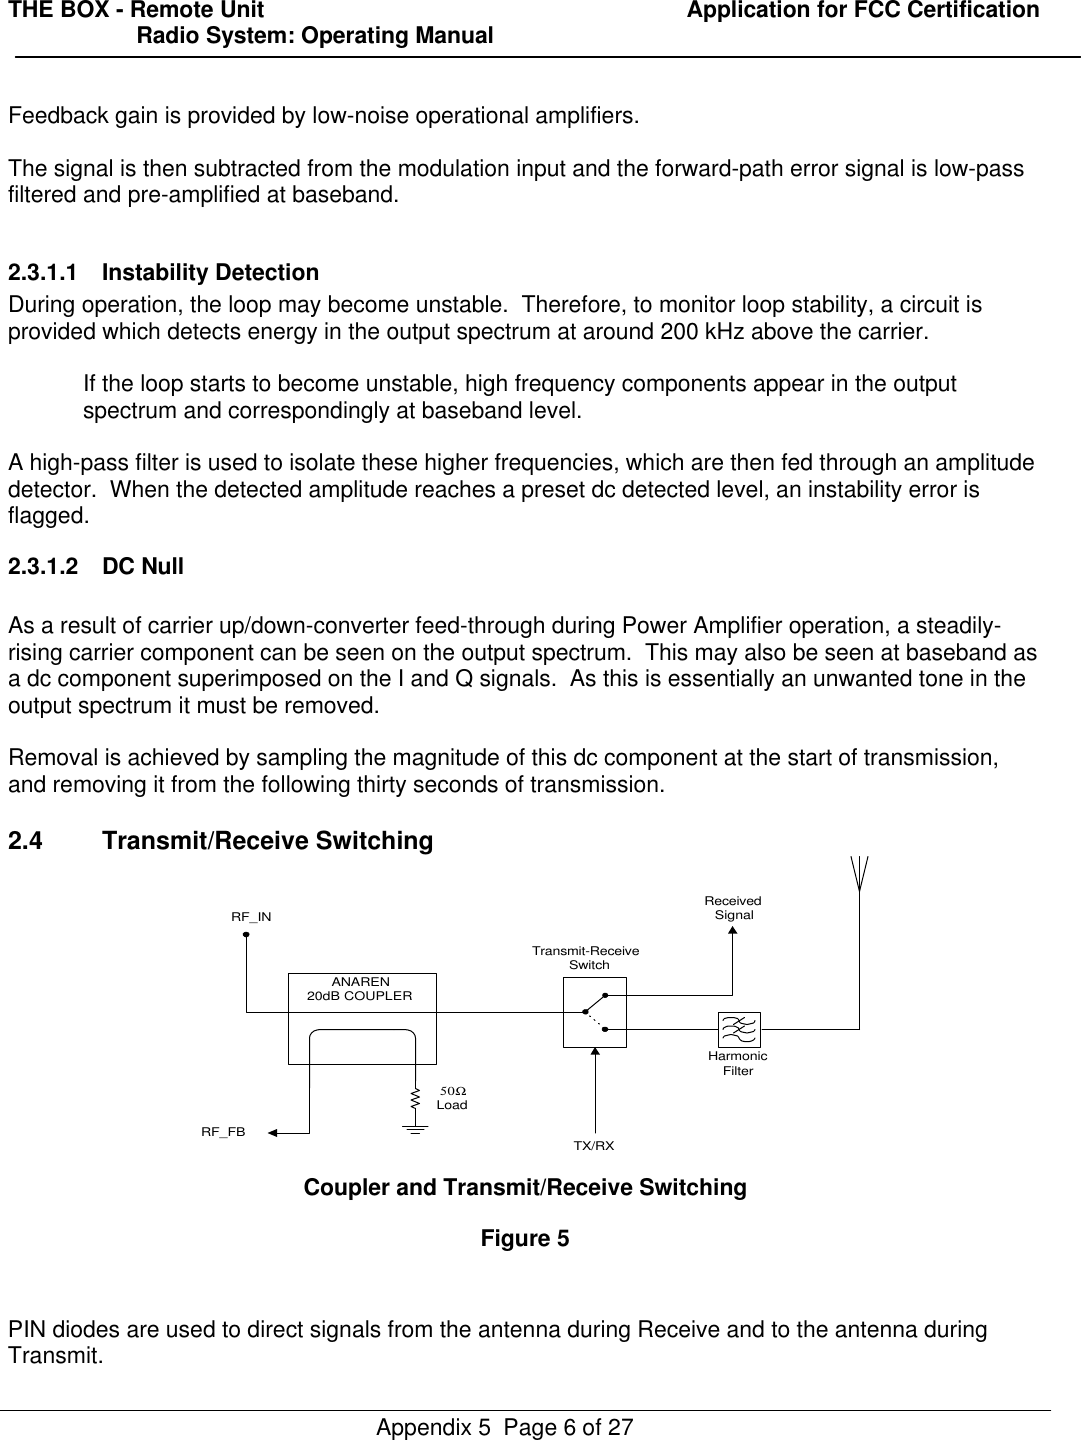 THE BOX - Remote Unit                                                                  Application for FCC Certification                    Radio System: Operating ManualAppendix 5  Page 6 of 27Feedback gain is provided by low-noise operational amplifiers.The signal is then subtracted from the modulation input and the forward-path error signal is low-passfiltered and pre-amplified at baseband.2.3.1.1 Instability DetectionDuring operation, the loop may become unstable.  Therefore, to monitor loop stability, a circuit isprovided which detects energy in the output spectrum at around 200 kHz above the carrier.If the loop starts to become unstable, high frequency components appear in the outputspectrum and correspondingly at baseband level.A high-pass filter is used to isolate these higher frequencies, which are then fed through an amplitudedetector.  When the detected amplitude reaches a preset dc detected level, an instability error isflagged.2.3.1.2 DC NullAs a result of carrier up/down-converter feed-through during Power Amplifier operation, a steadily-rising carrier component can be seen on the output spectrum.  This may also be seen at baseband asa dc component superimposed on the I and Q signals.  As this is essentially an unwanted tone in theoutput spectrum it must be removed.Removal is achieved by sampling the magnitude of this dc component at the start of transmission,and removing it from the following thirty seconds of transmission.2.4 Transmit/Receive SwitchingANAREN20dB COUPLERHarmonicFilterTX/RXReceivedSignalTransmit-ReceiveSwitchRF_INRF_FB50ΩLoadCoupler and Transmit/Receive SwitchingFigure 5PIN diodes are used to direct signals from the antenna during Receive and to the antenna duringTransmit.